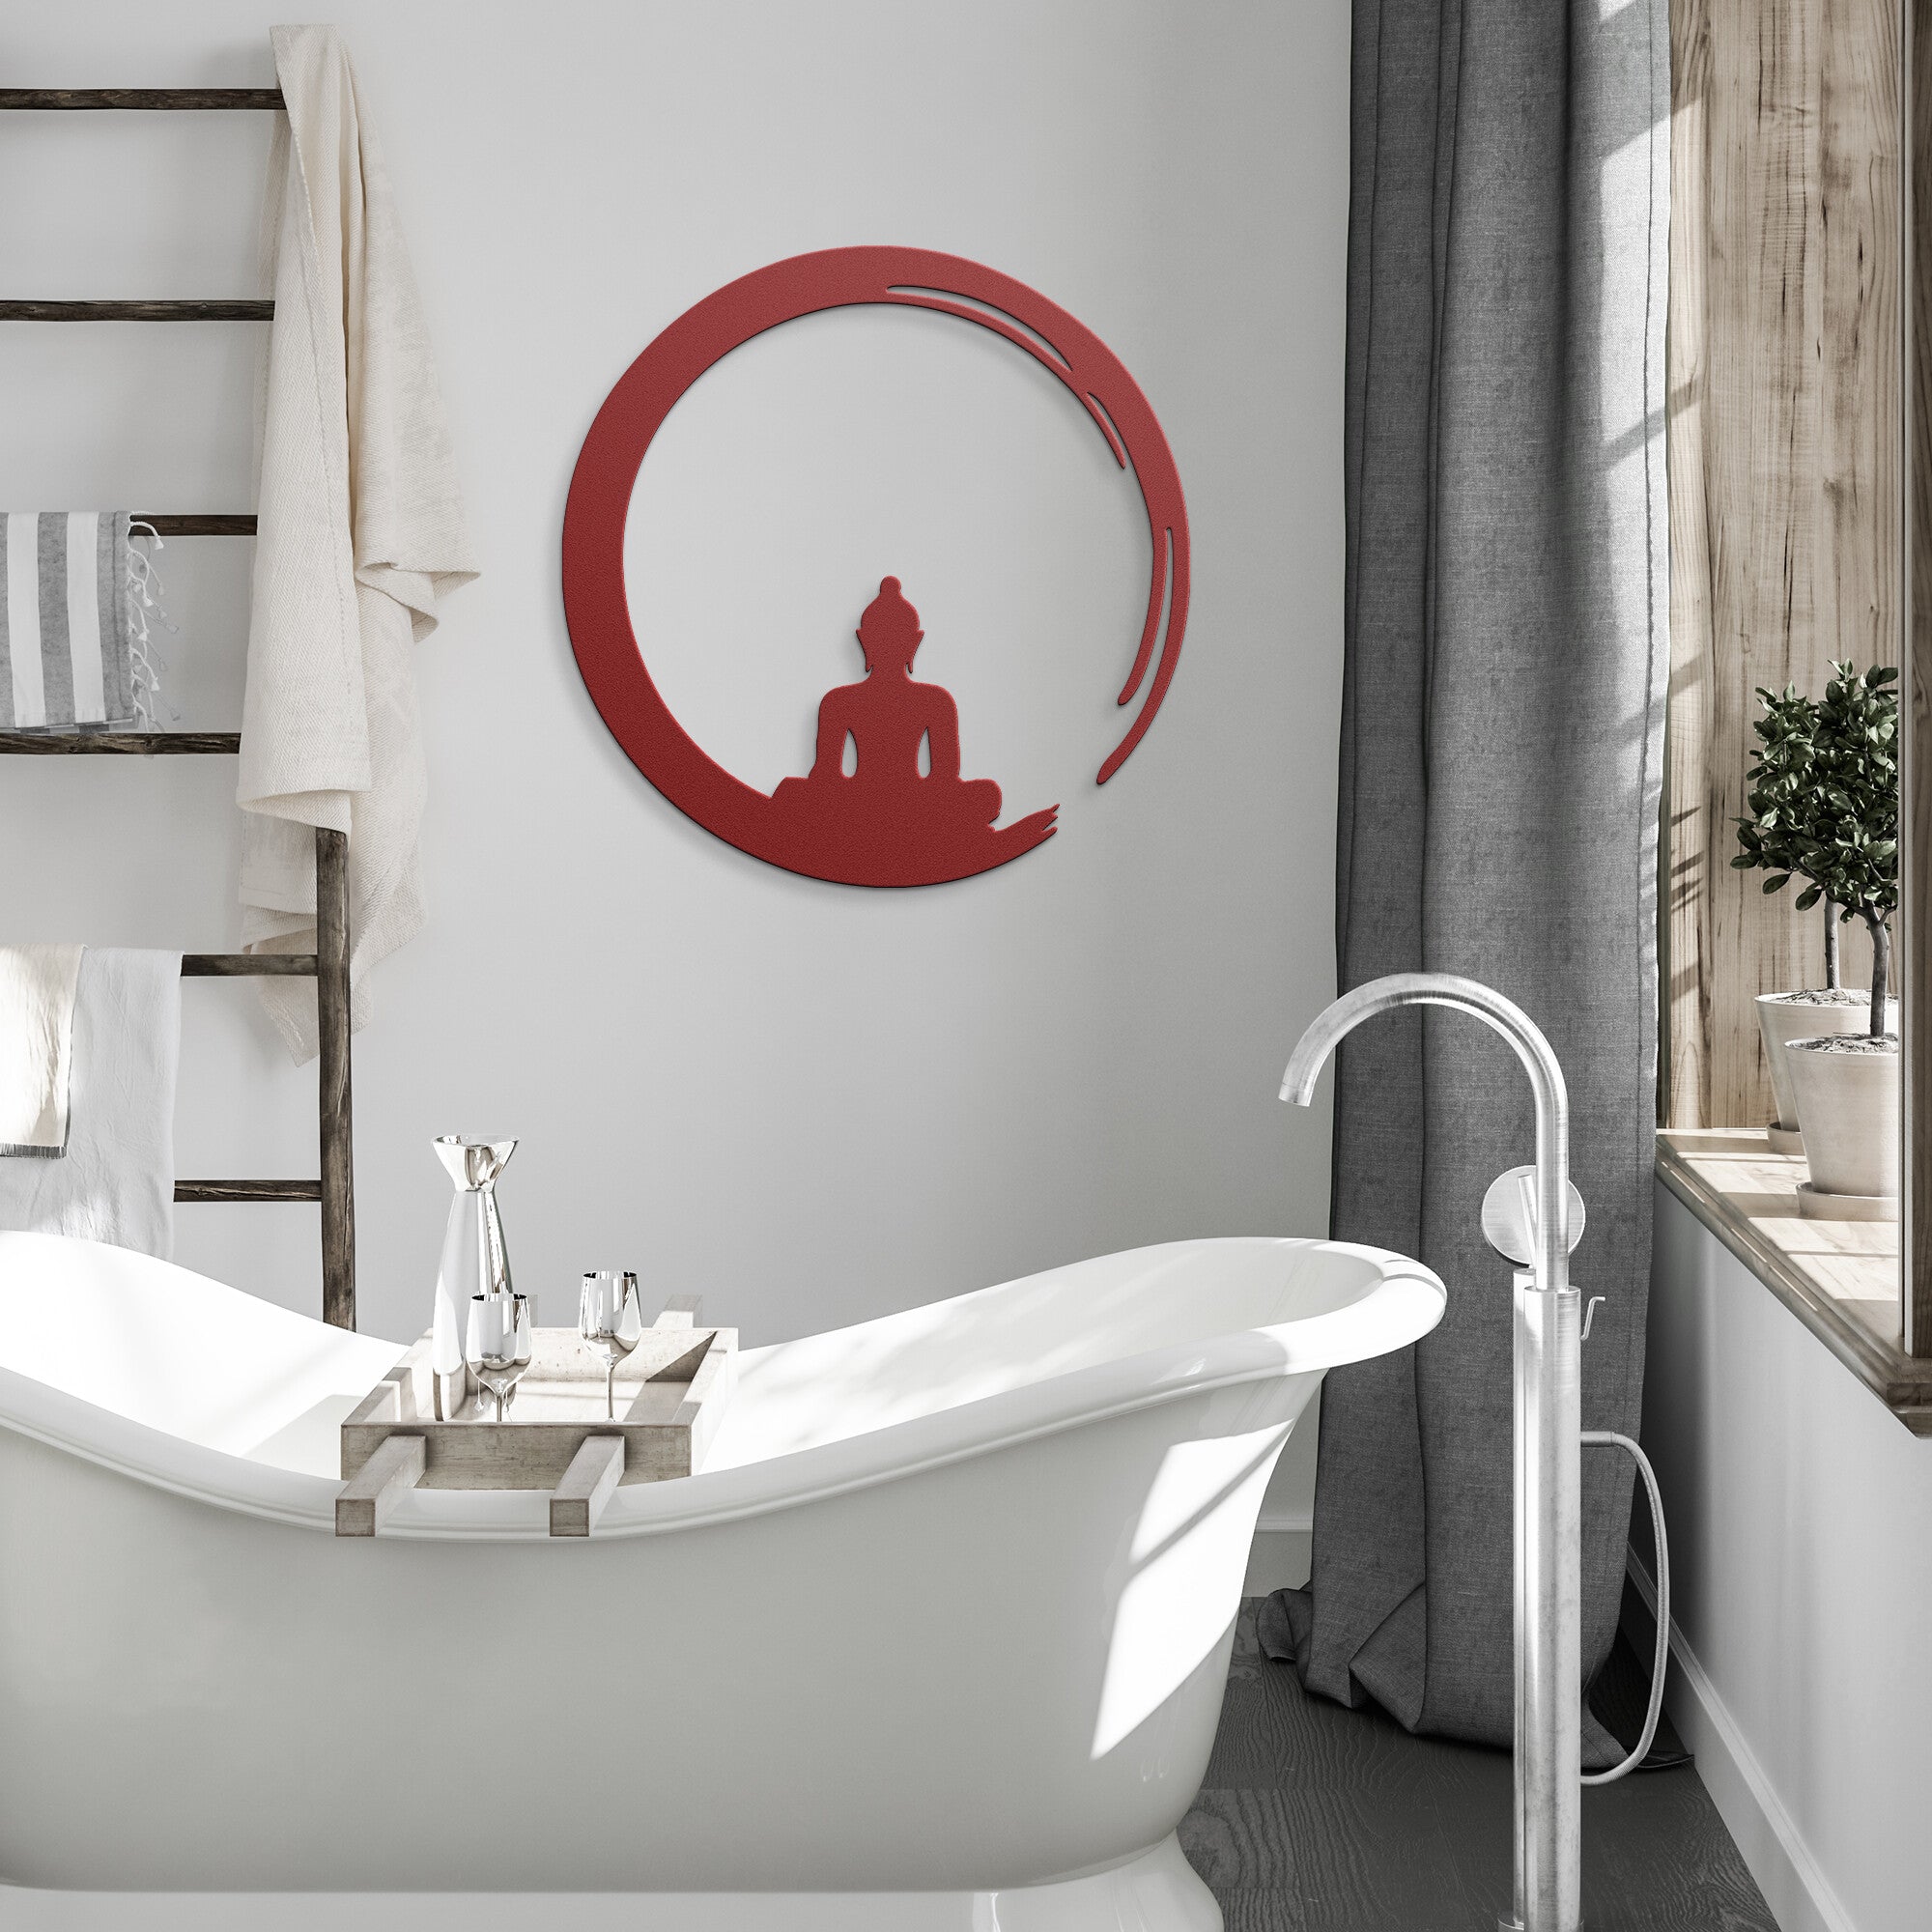 Zen enso buddhism yoga and zen wall art - Personal Hour for Yoga and Meditations 